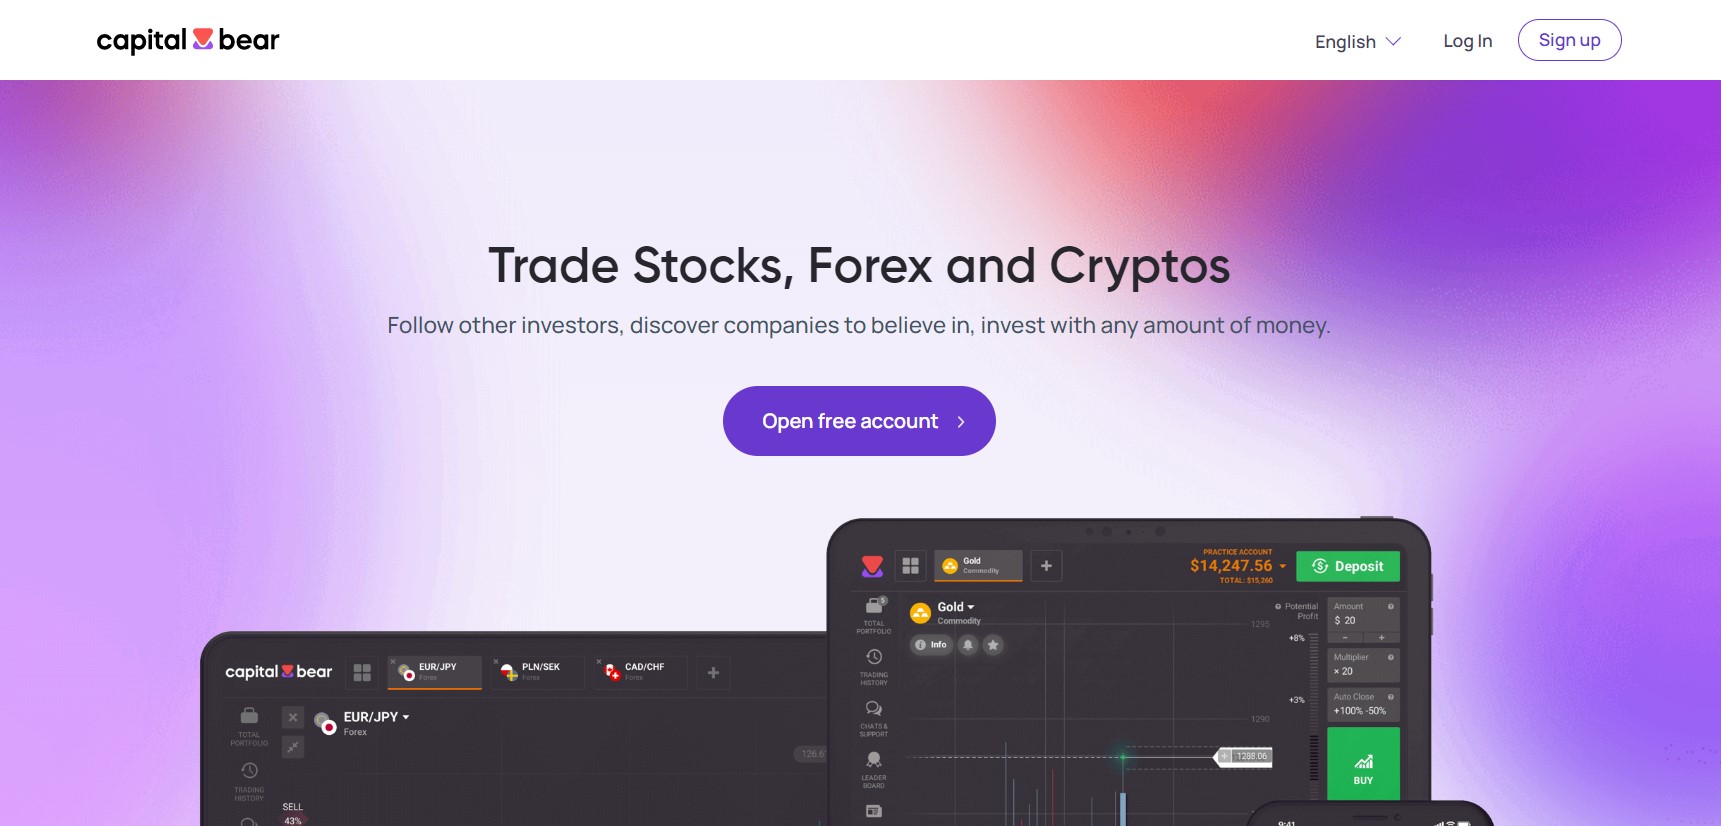 The official website of Capital Bear